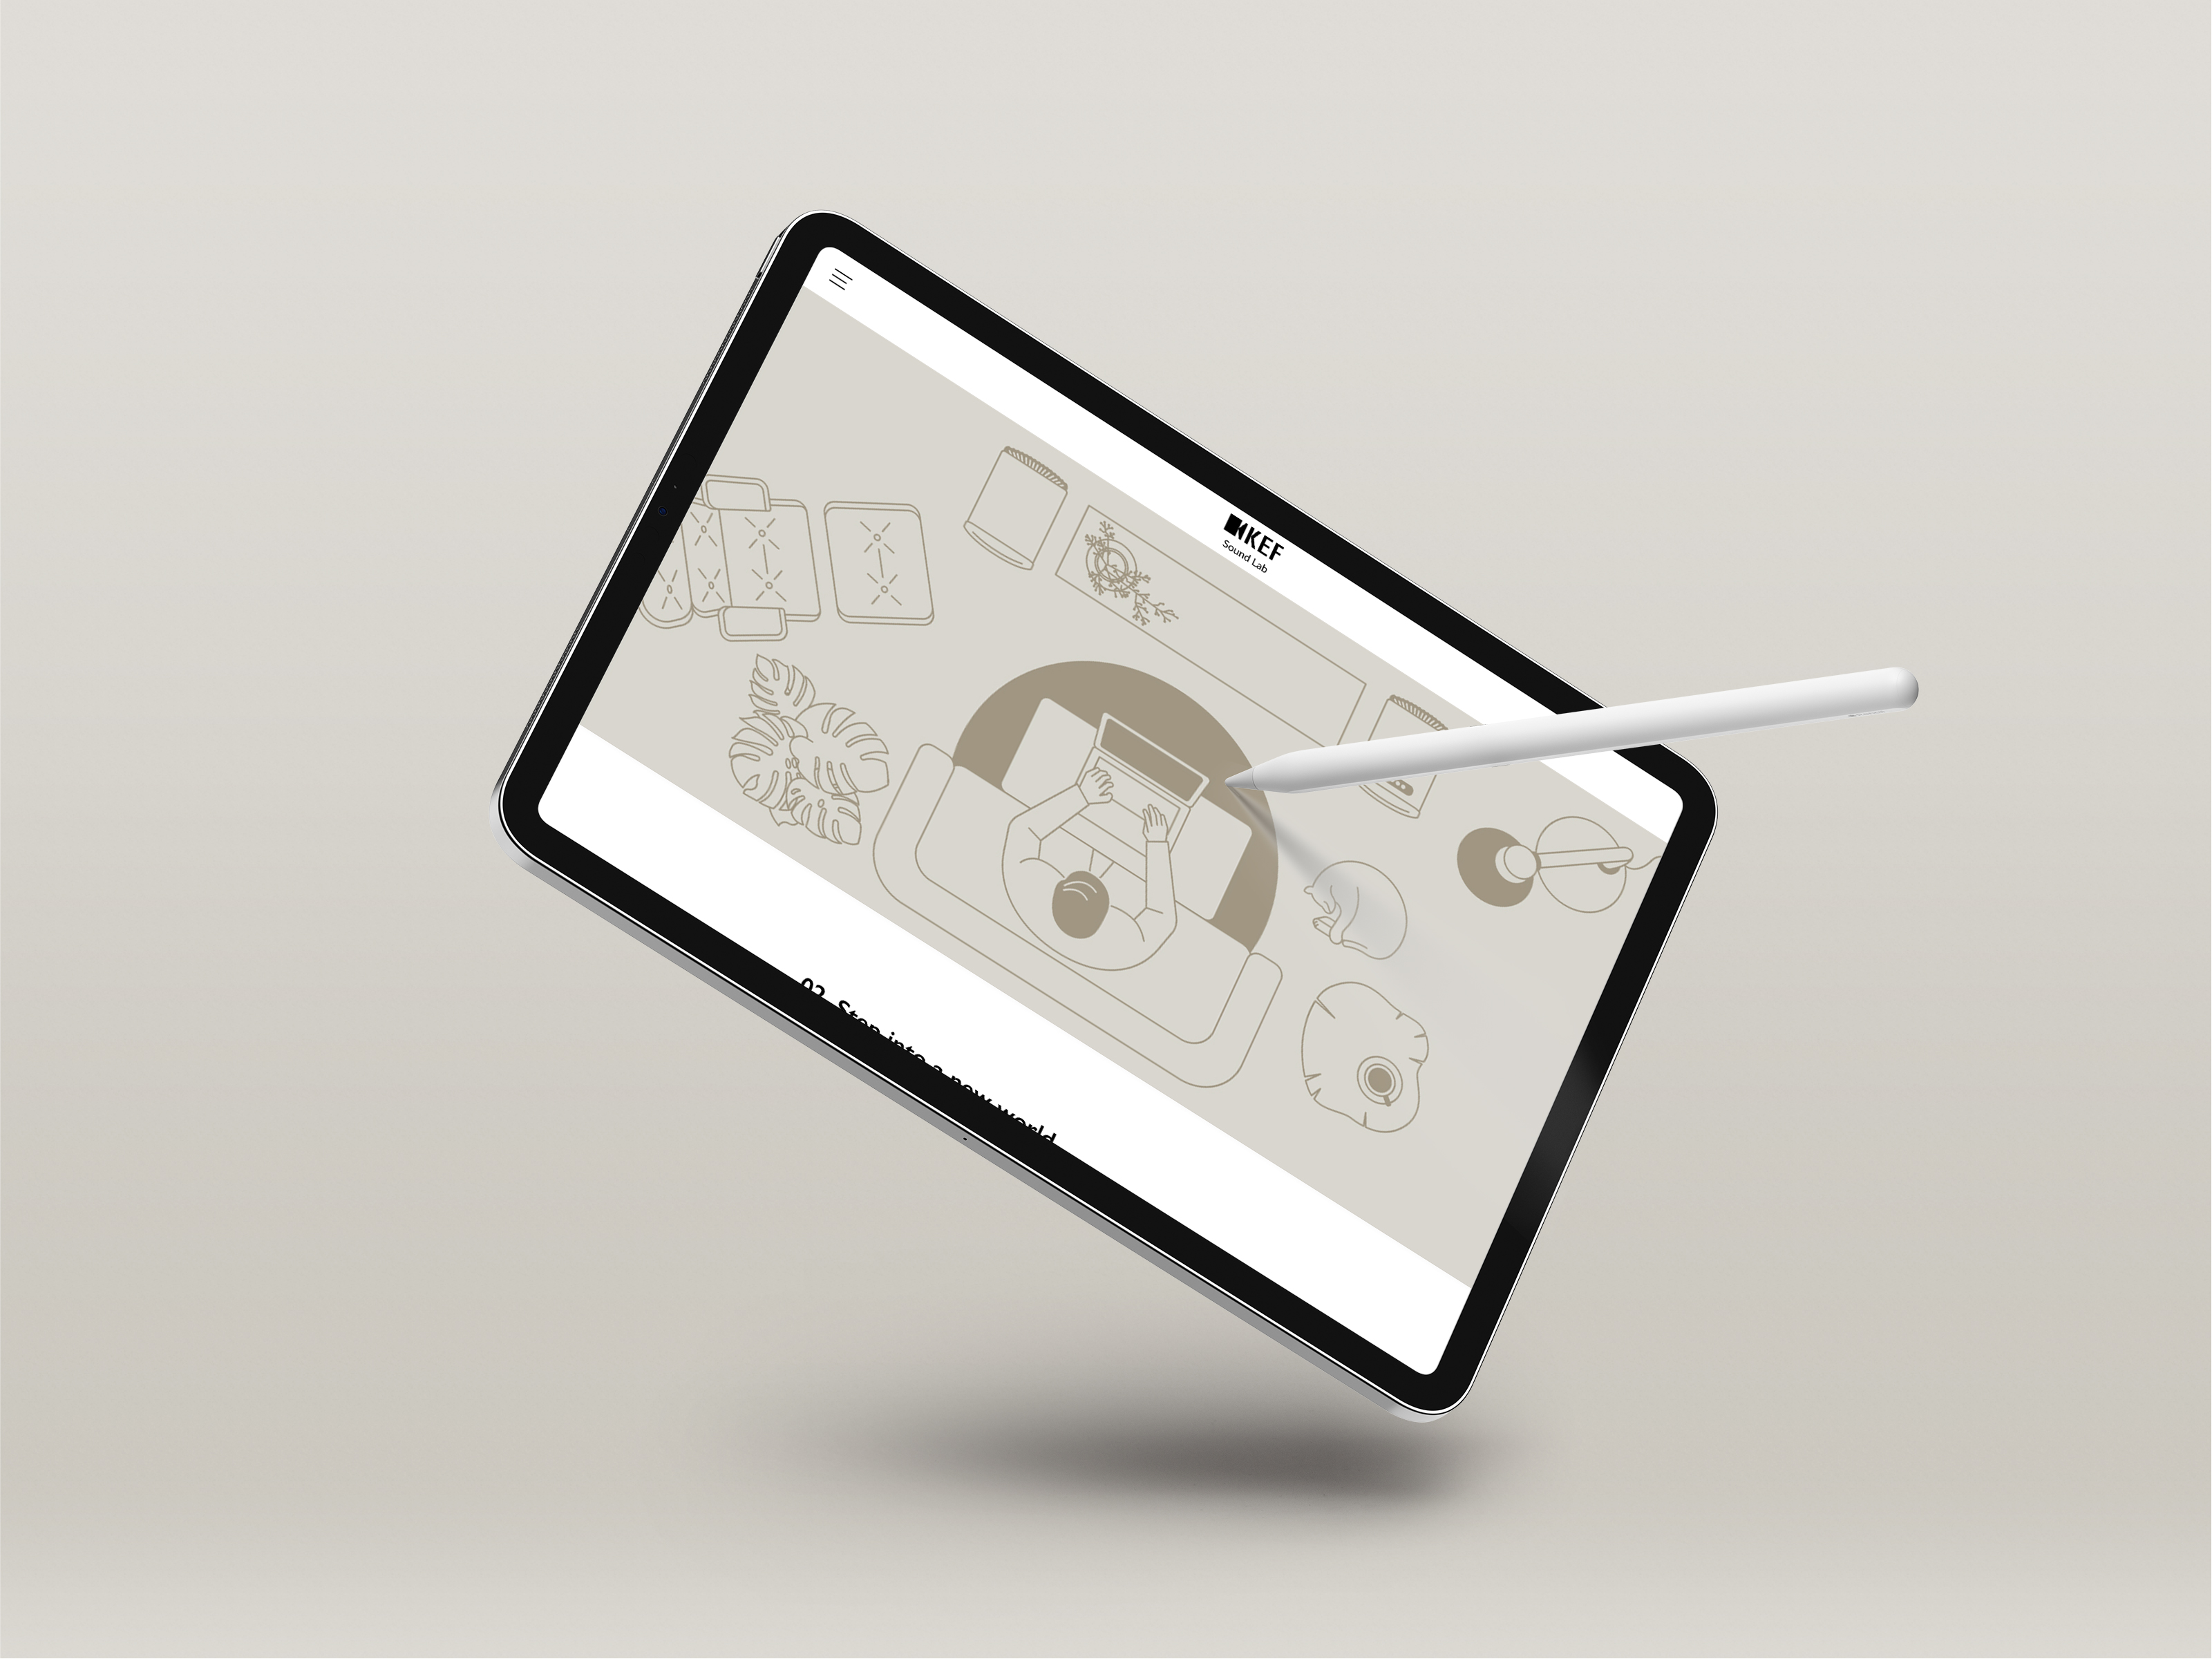 KEF SoundLab illustration featuring contemporary graphic style executed using clean lines, solid-filled colours and unpretentious animation viewed on iPad with a pen.